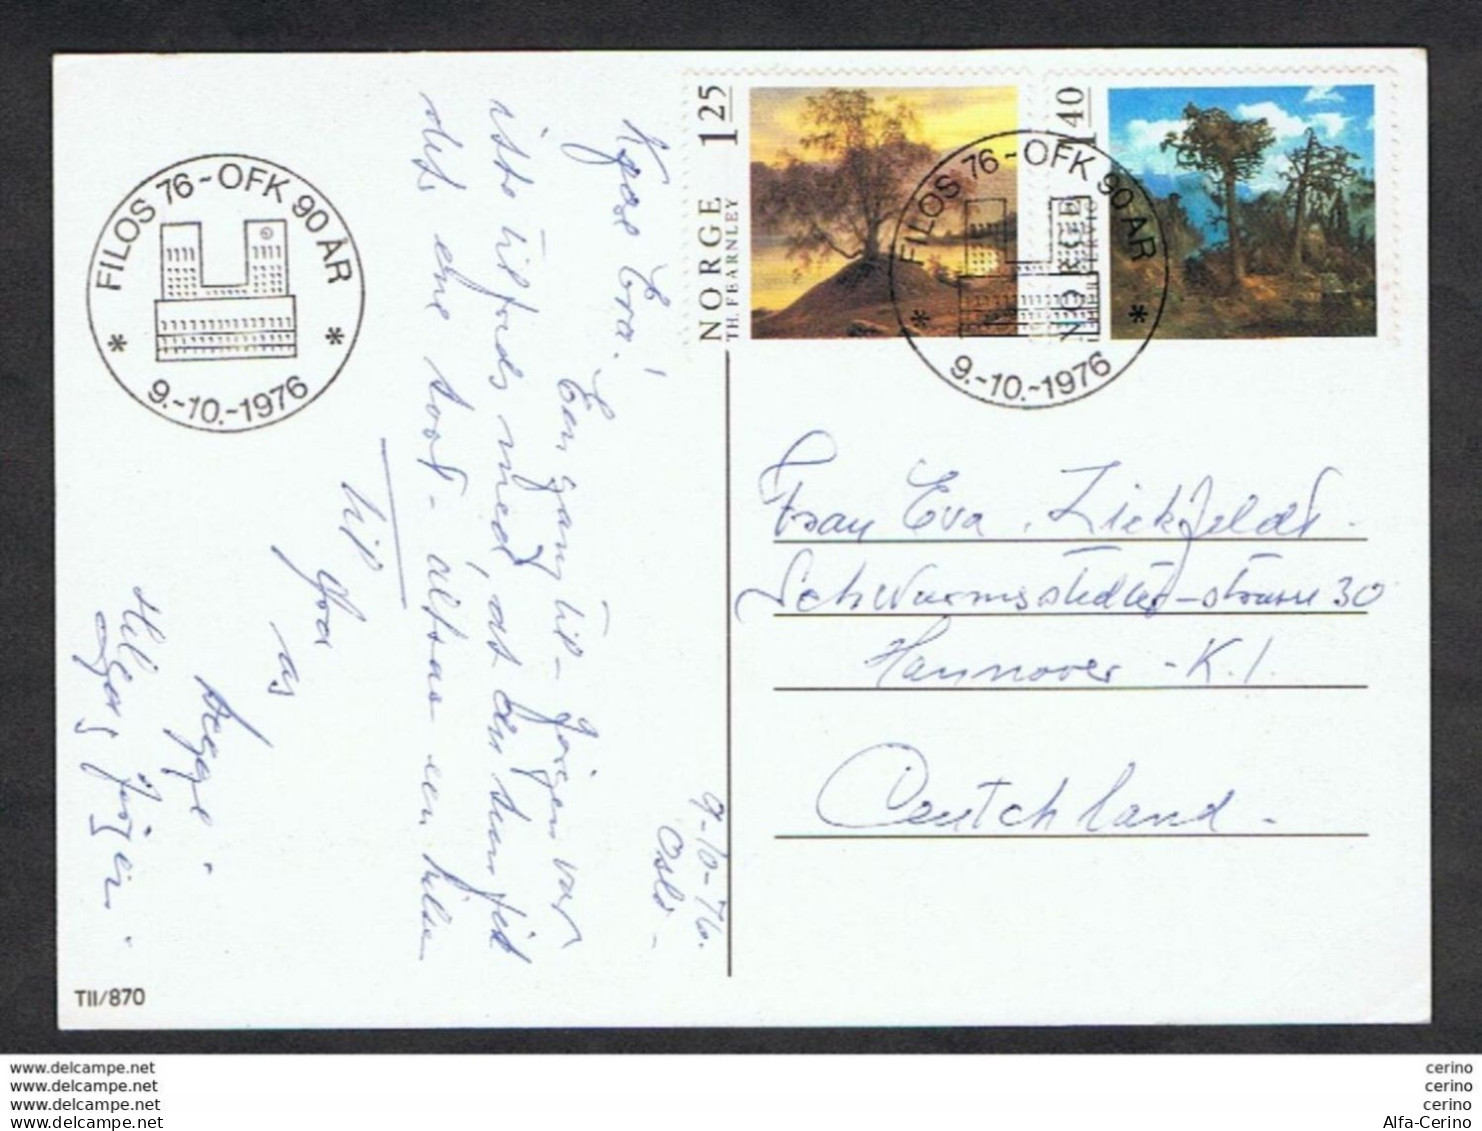 NORWAY: 9-10-1976 ILLUSTRATED POSTCARD "FILOS 76" WITH: 125 Ore + 140 Ore (688 + 689) - TO GERMANY - Storia Postale